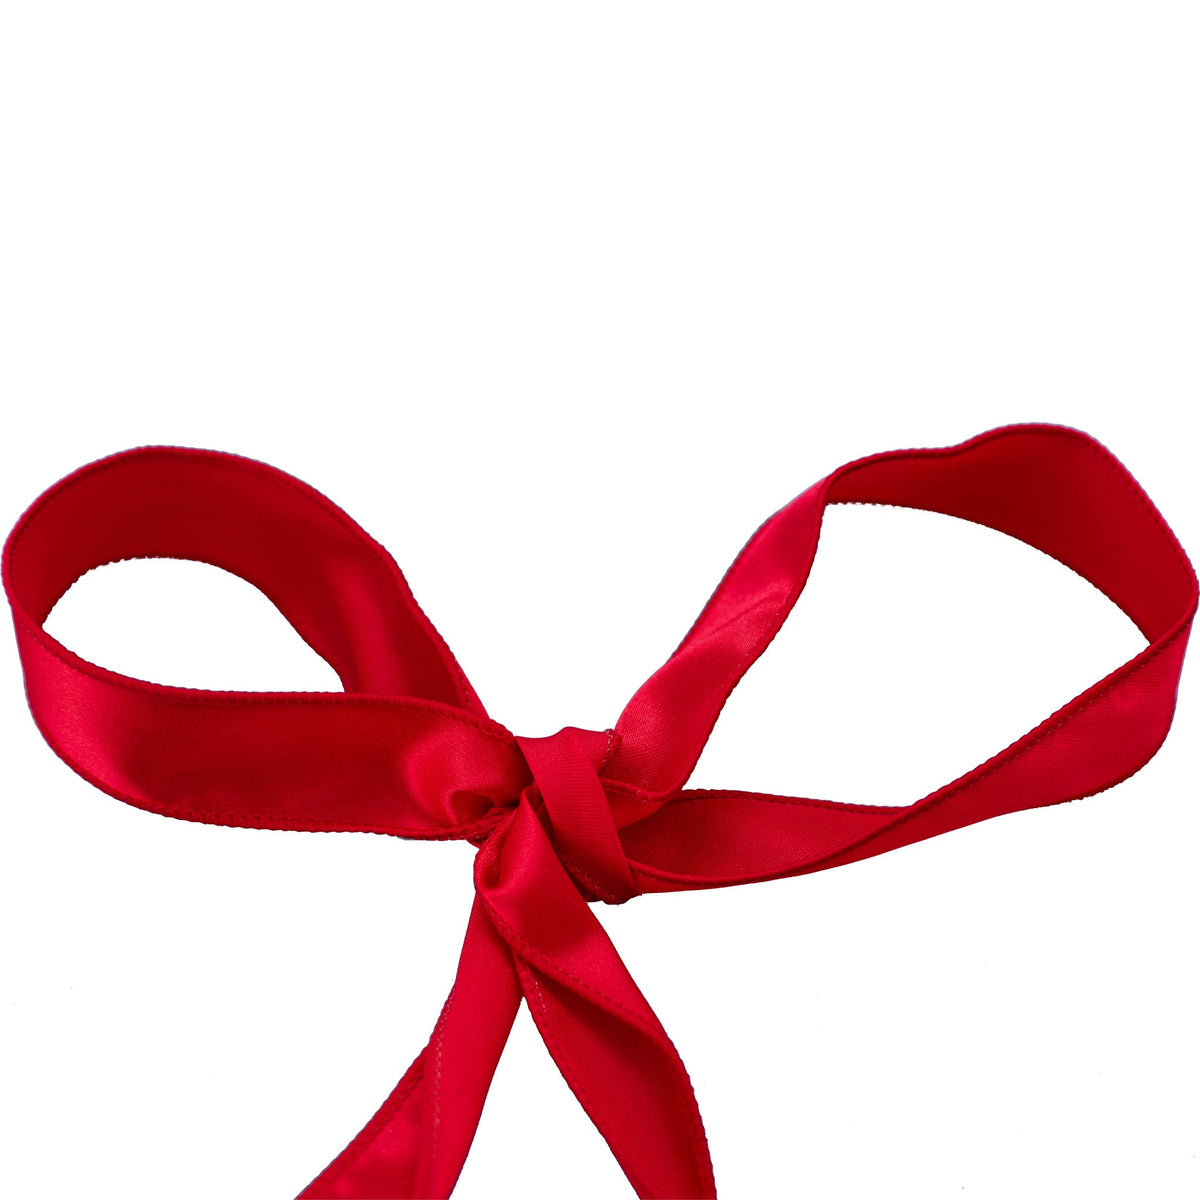 Ribbon with a wired edge makes Bow-making easier than ever as the shape stays in place while your wrapping your bows